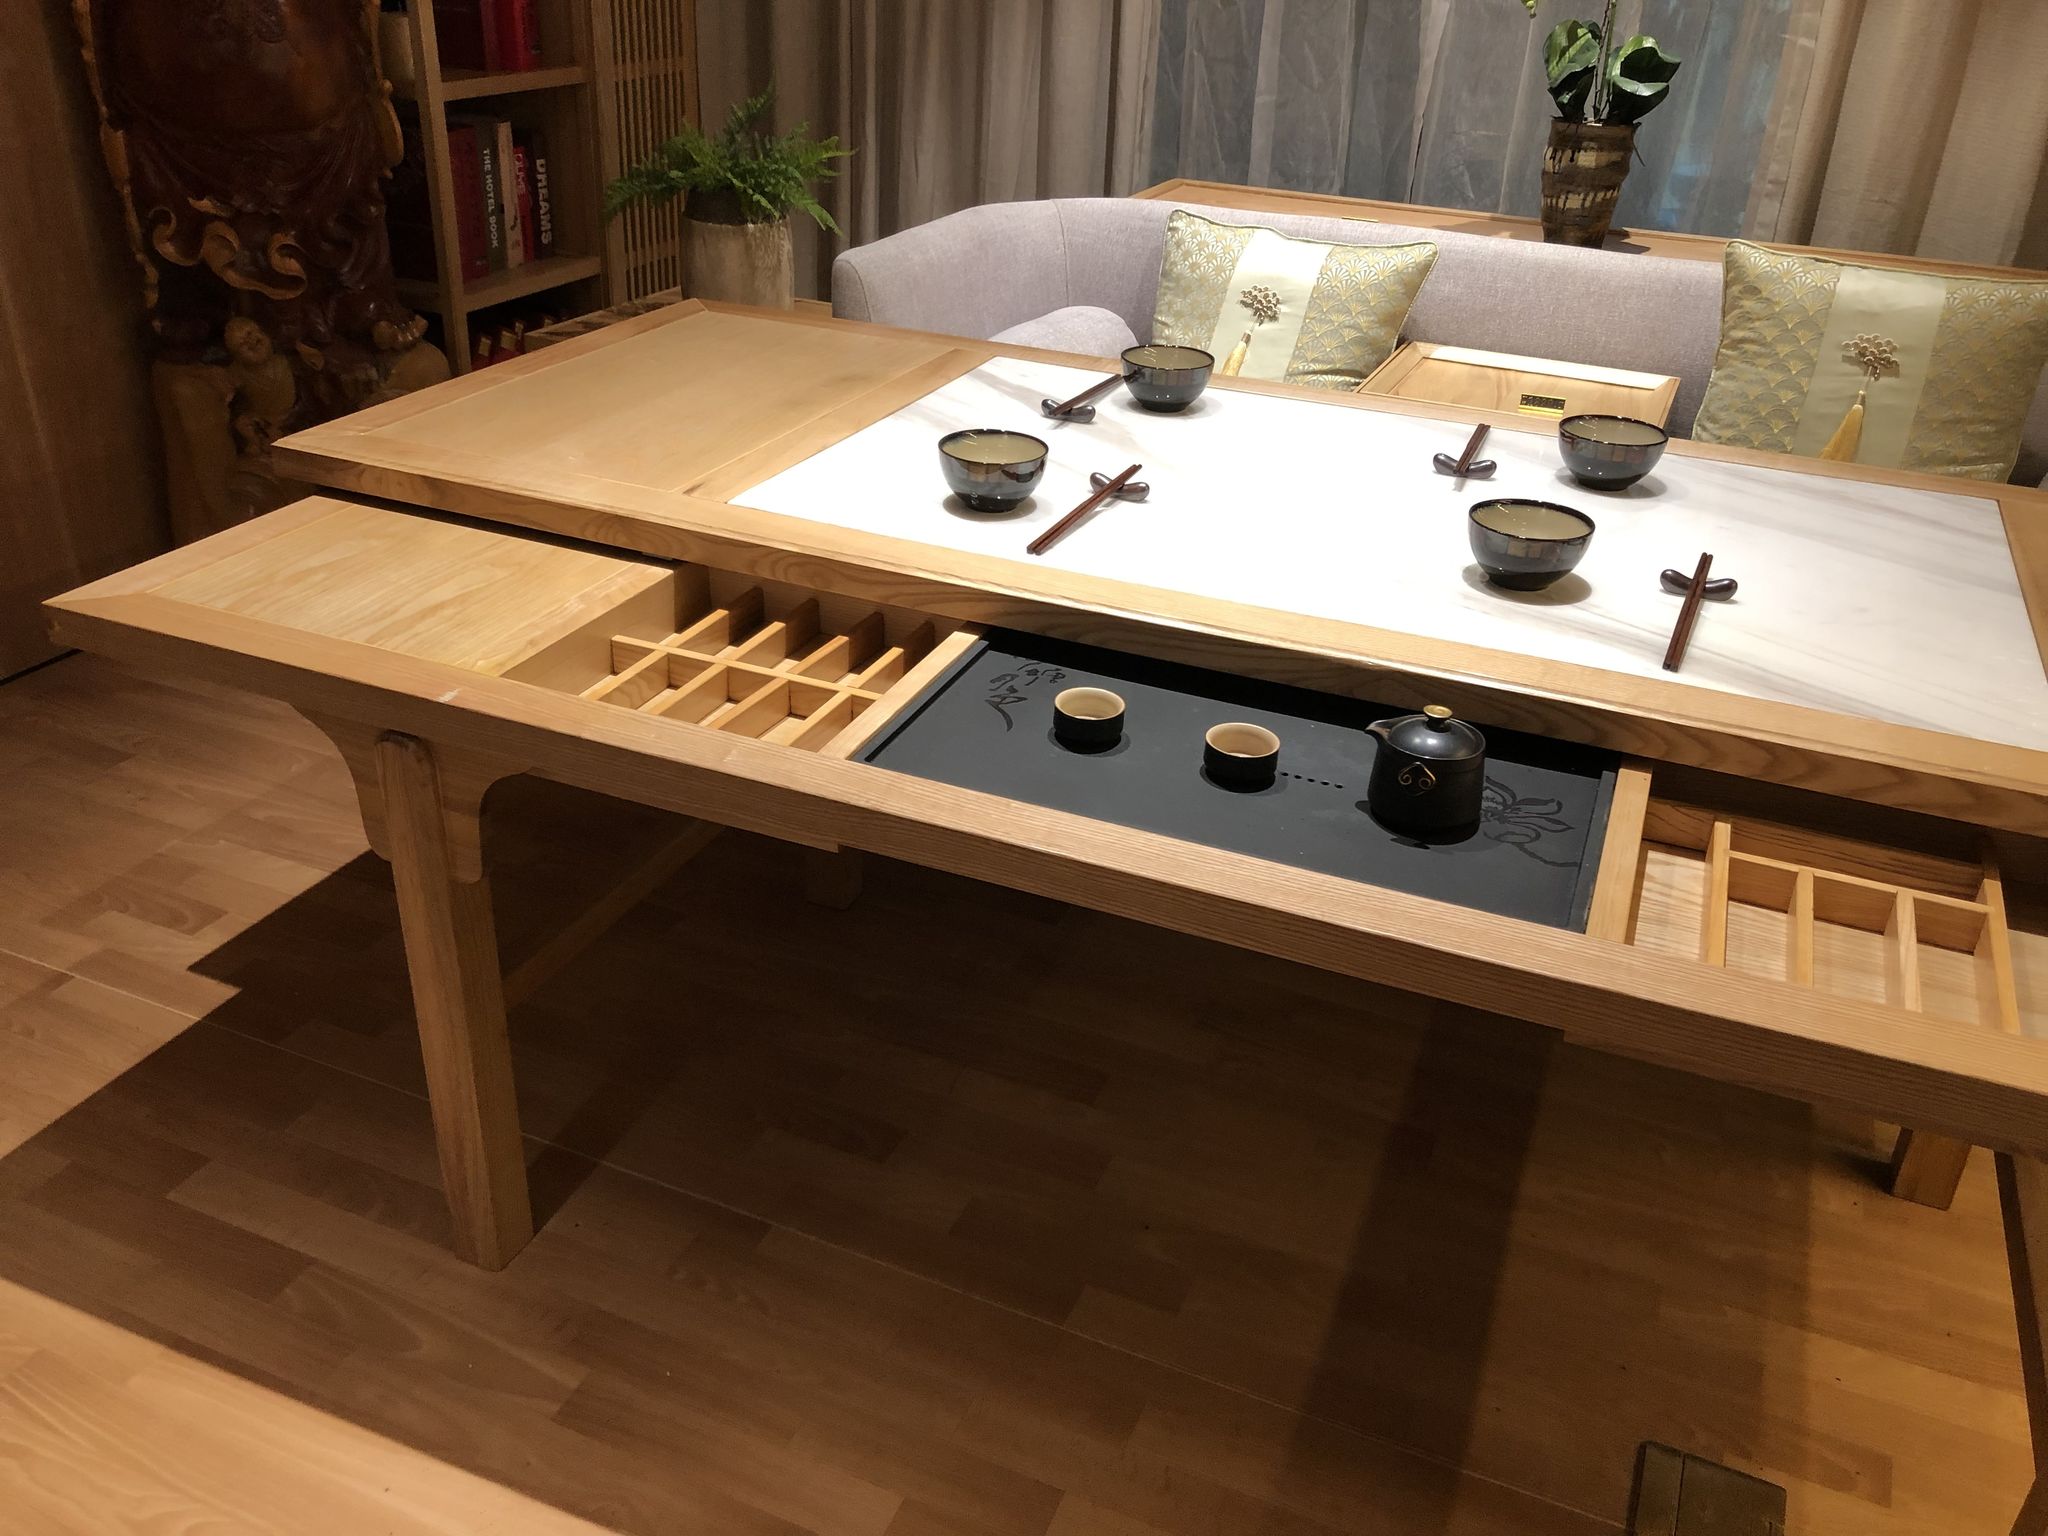 Multi purpose table from traditional Chinese craft